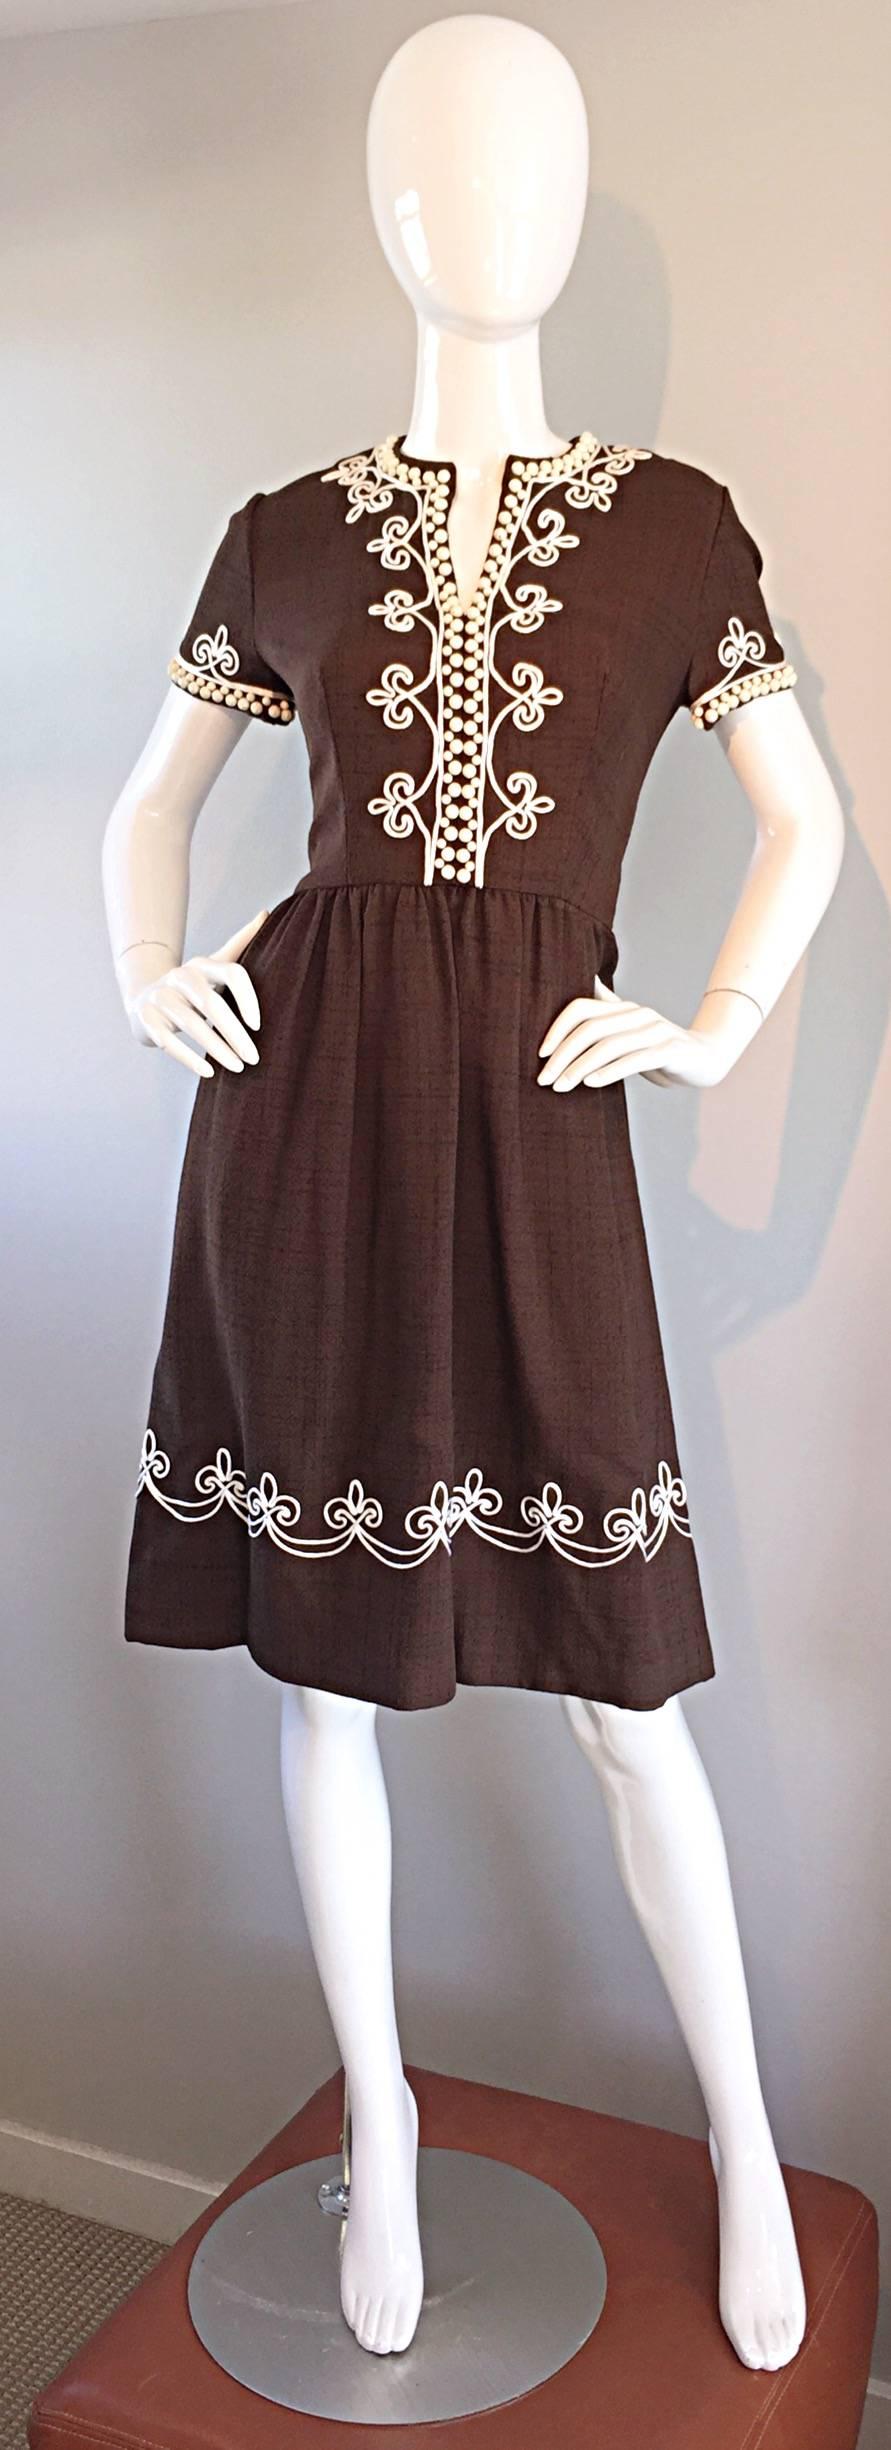 Chic 1960s OSCAR DE LA RENTA brown and white linen dress! Coffee colored brown, with white embroidery tracing the hem, bodice, and sleeves. White beads up the bodice and at sleeve cuffs. Full metal zipper up the back, with hook-and-eye closure.